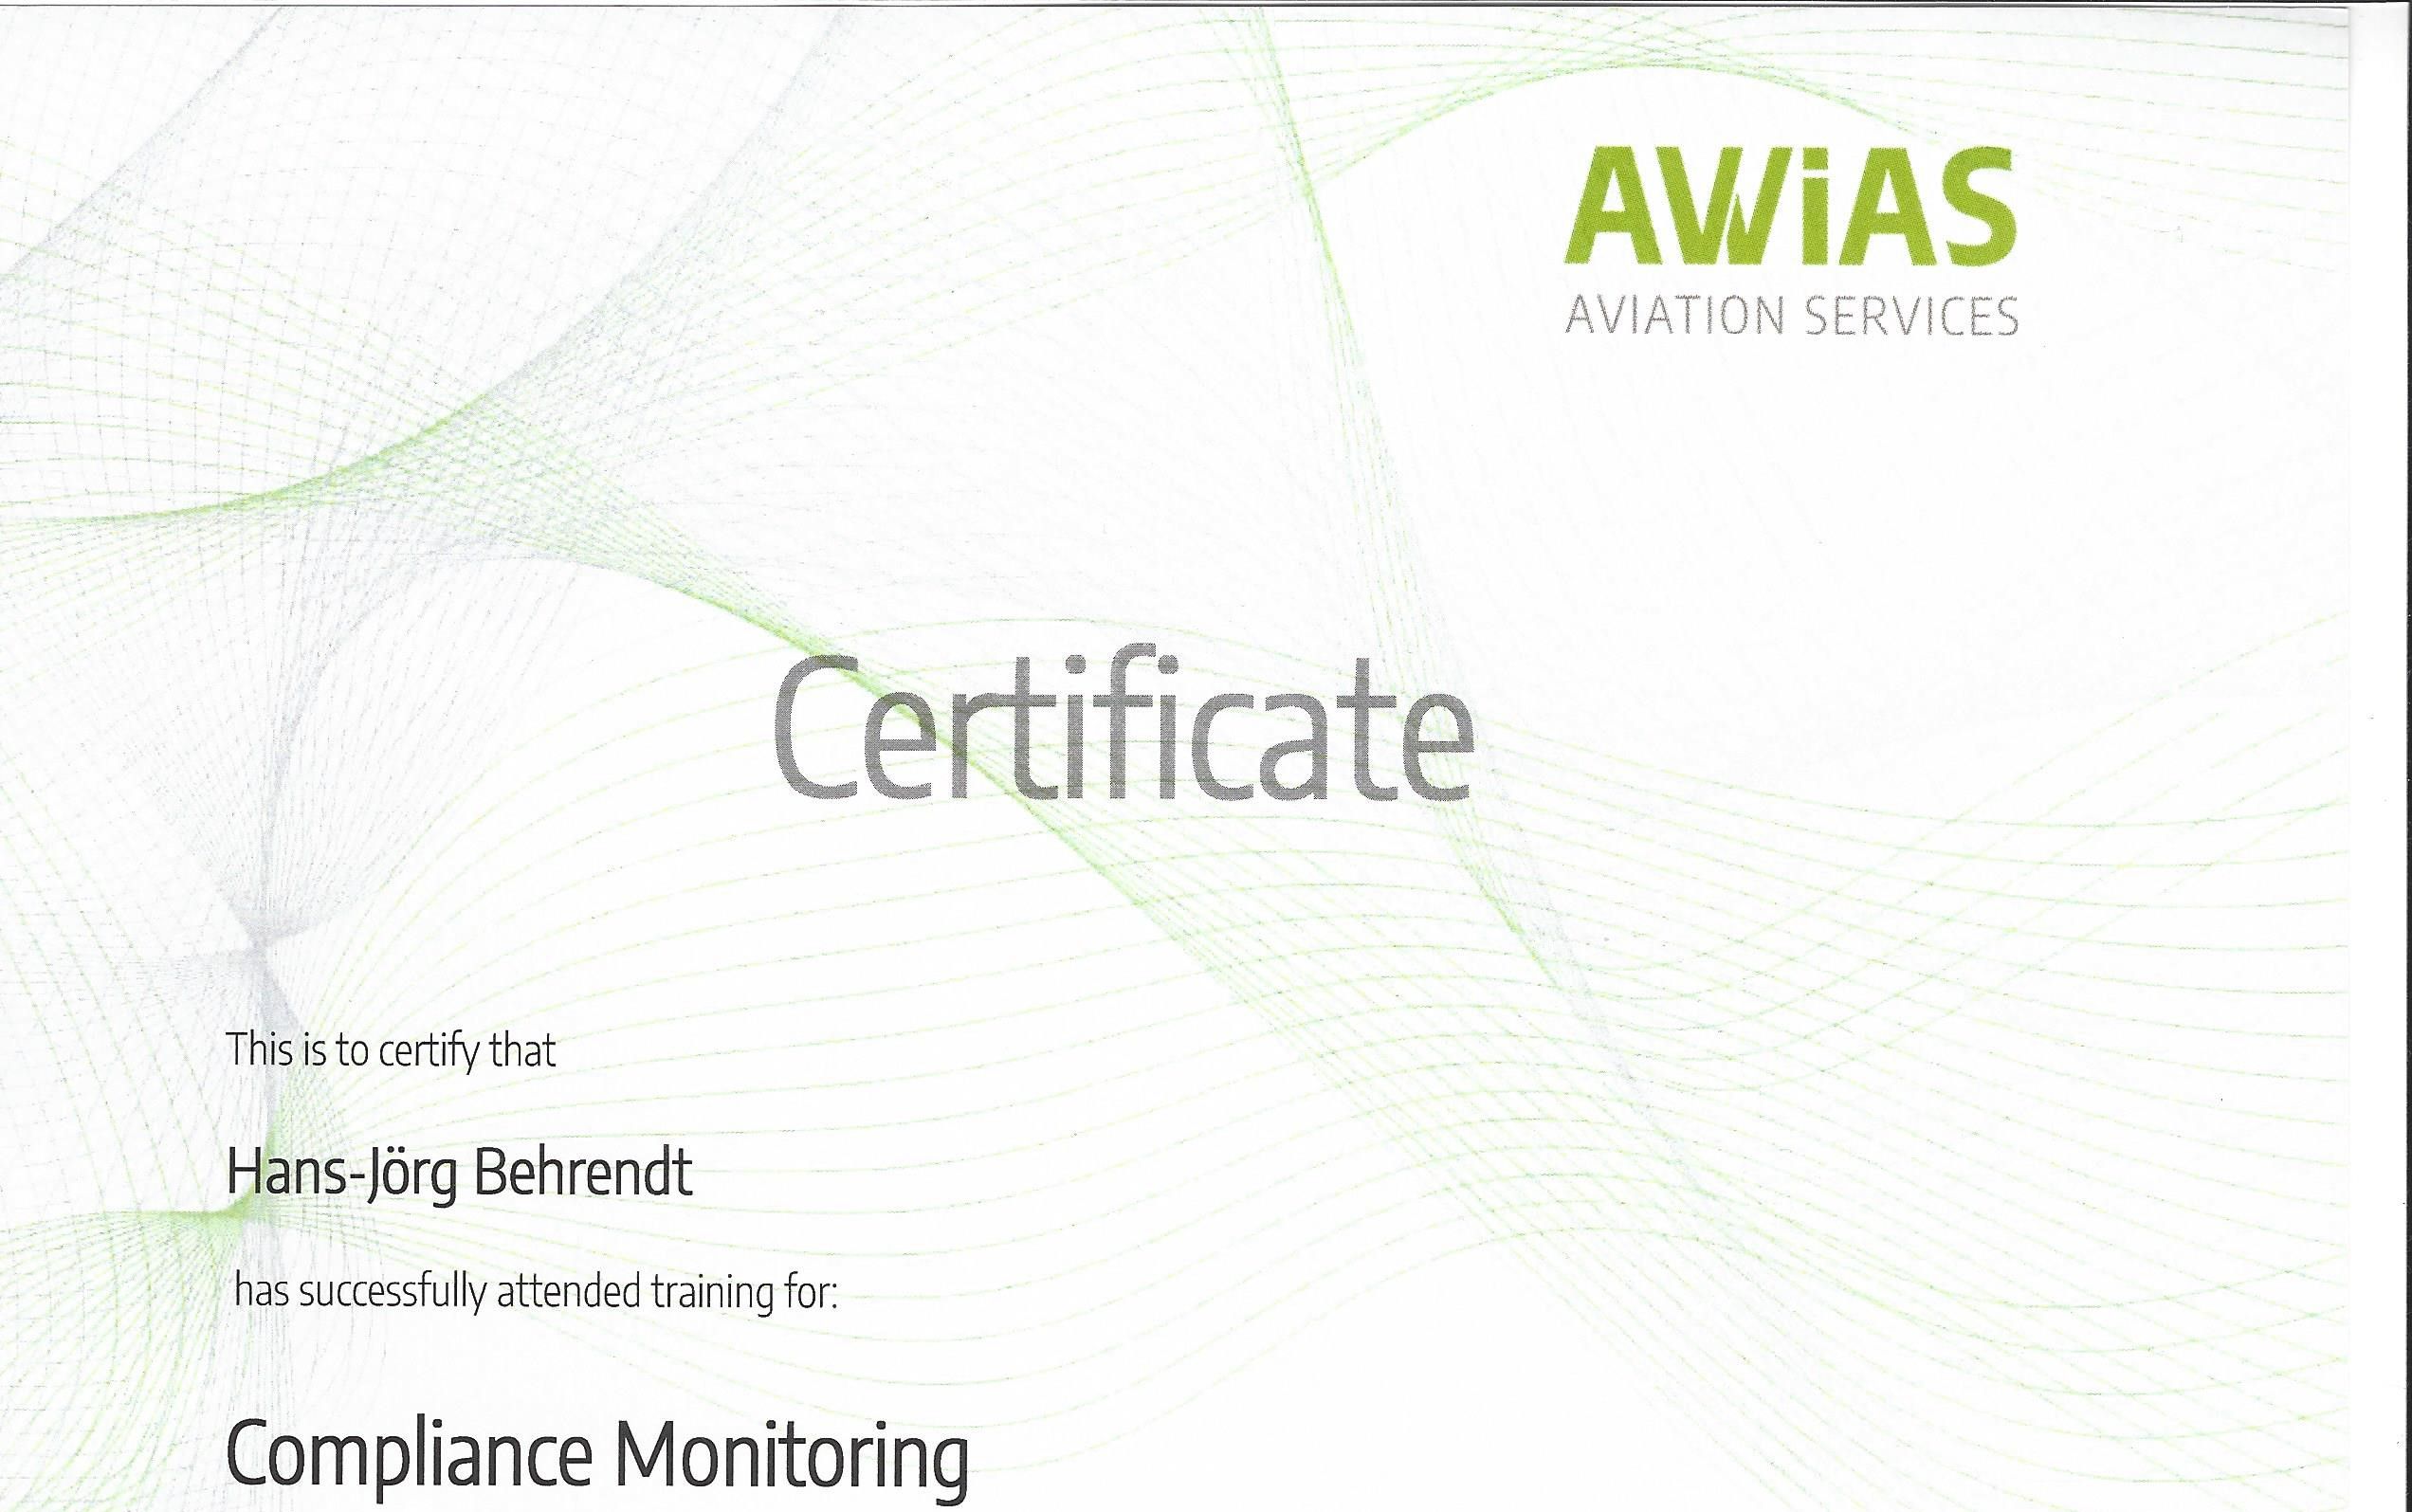 Safety and Compliance Management Monitoring Auditing in Aviation